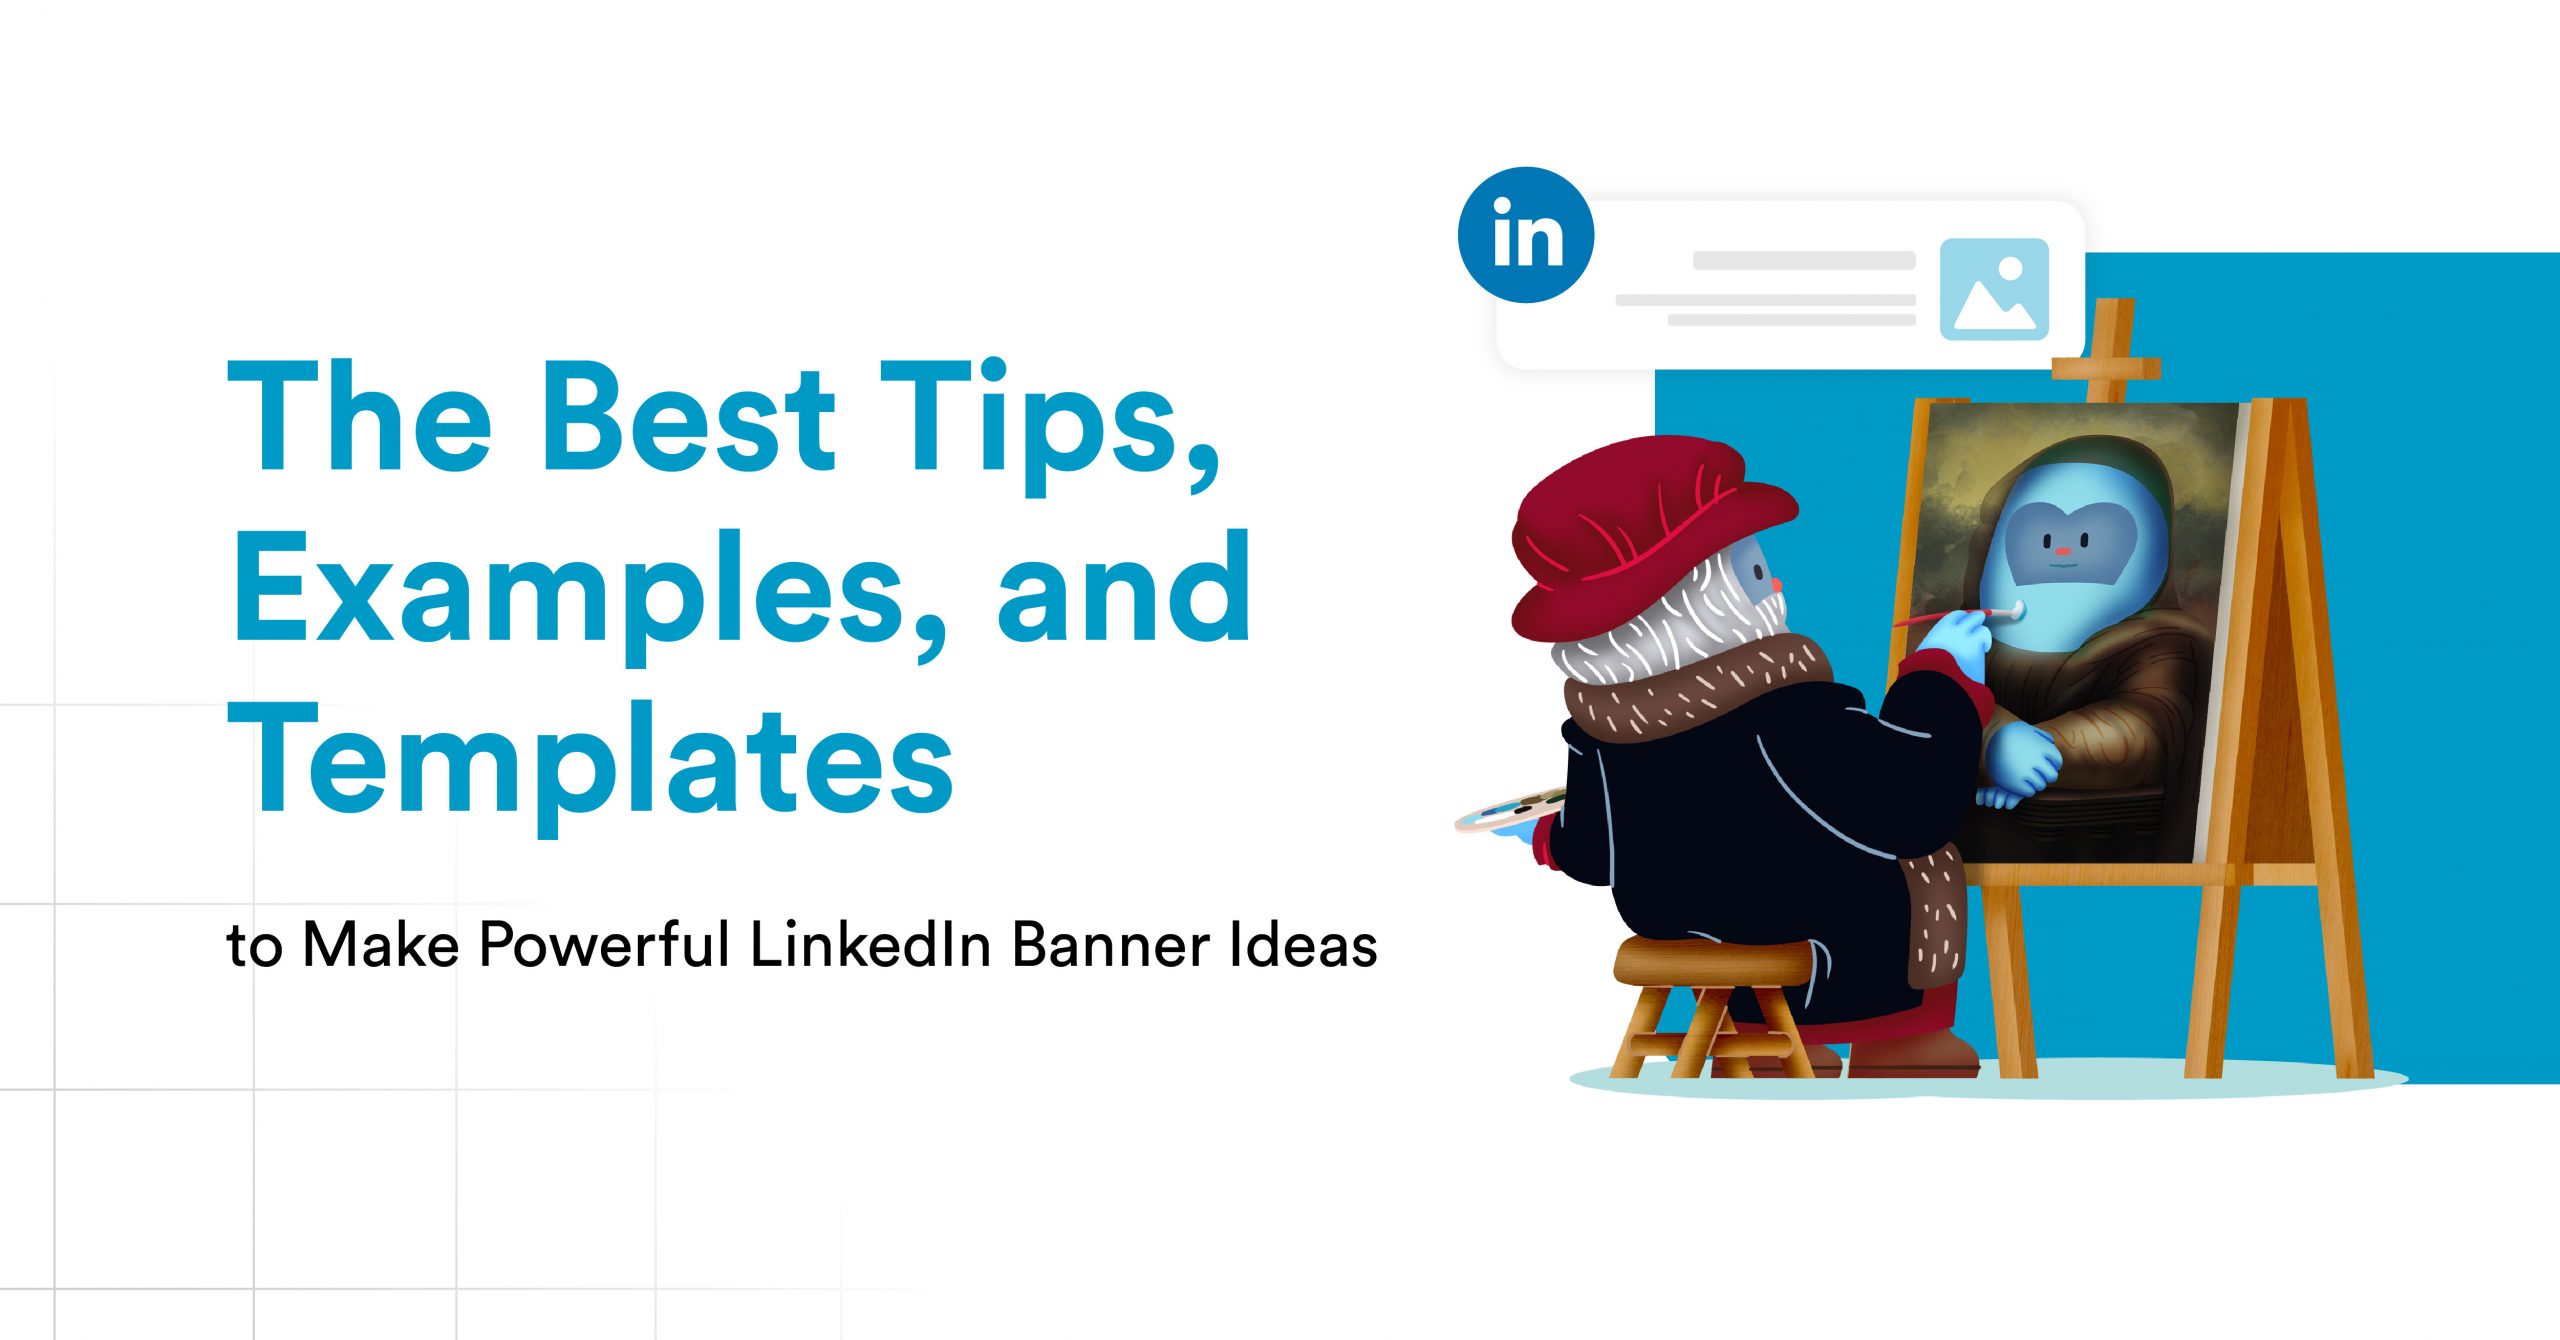 The Best Tips, Examples, and Templates to Make Powerful LinkedIn Banner Ideas